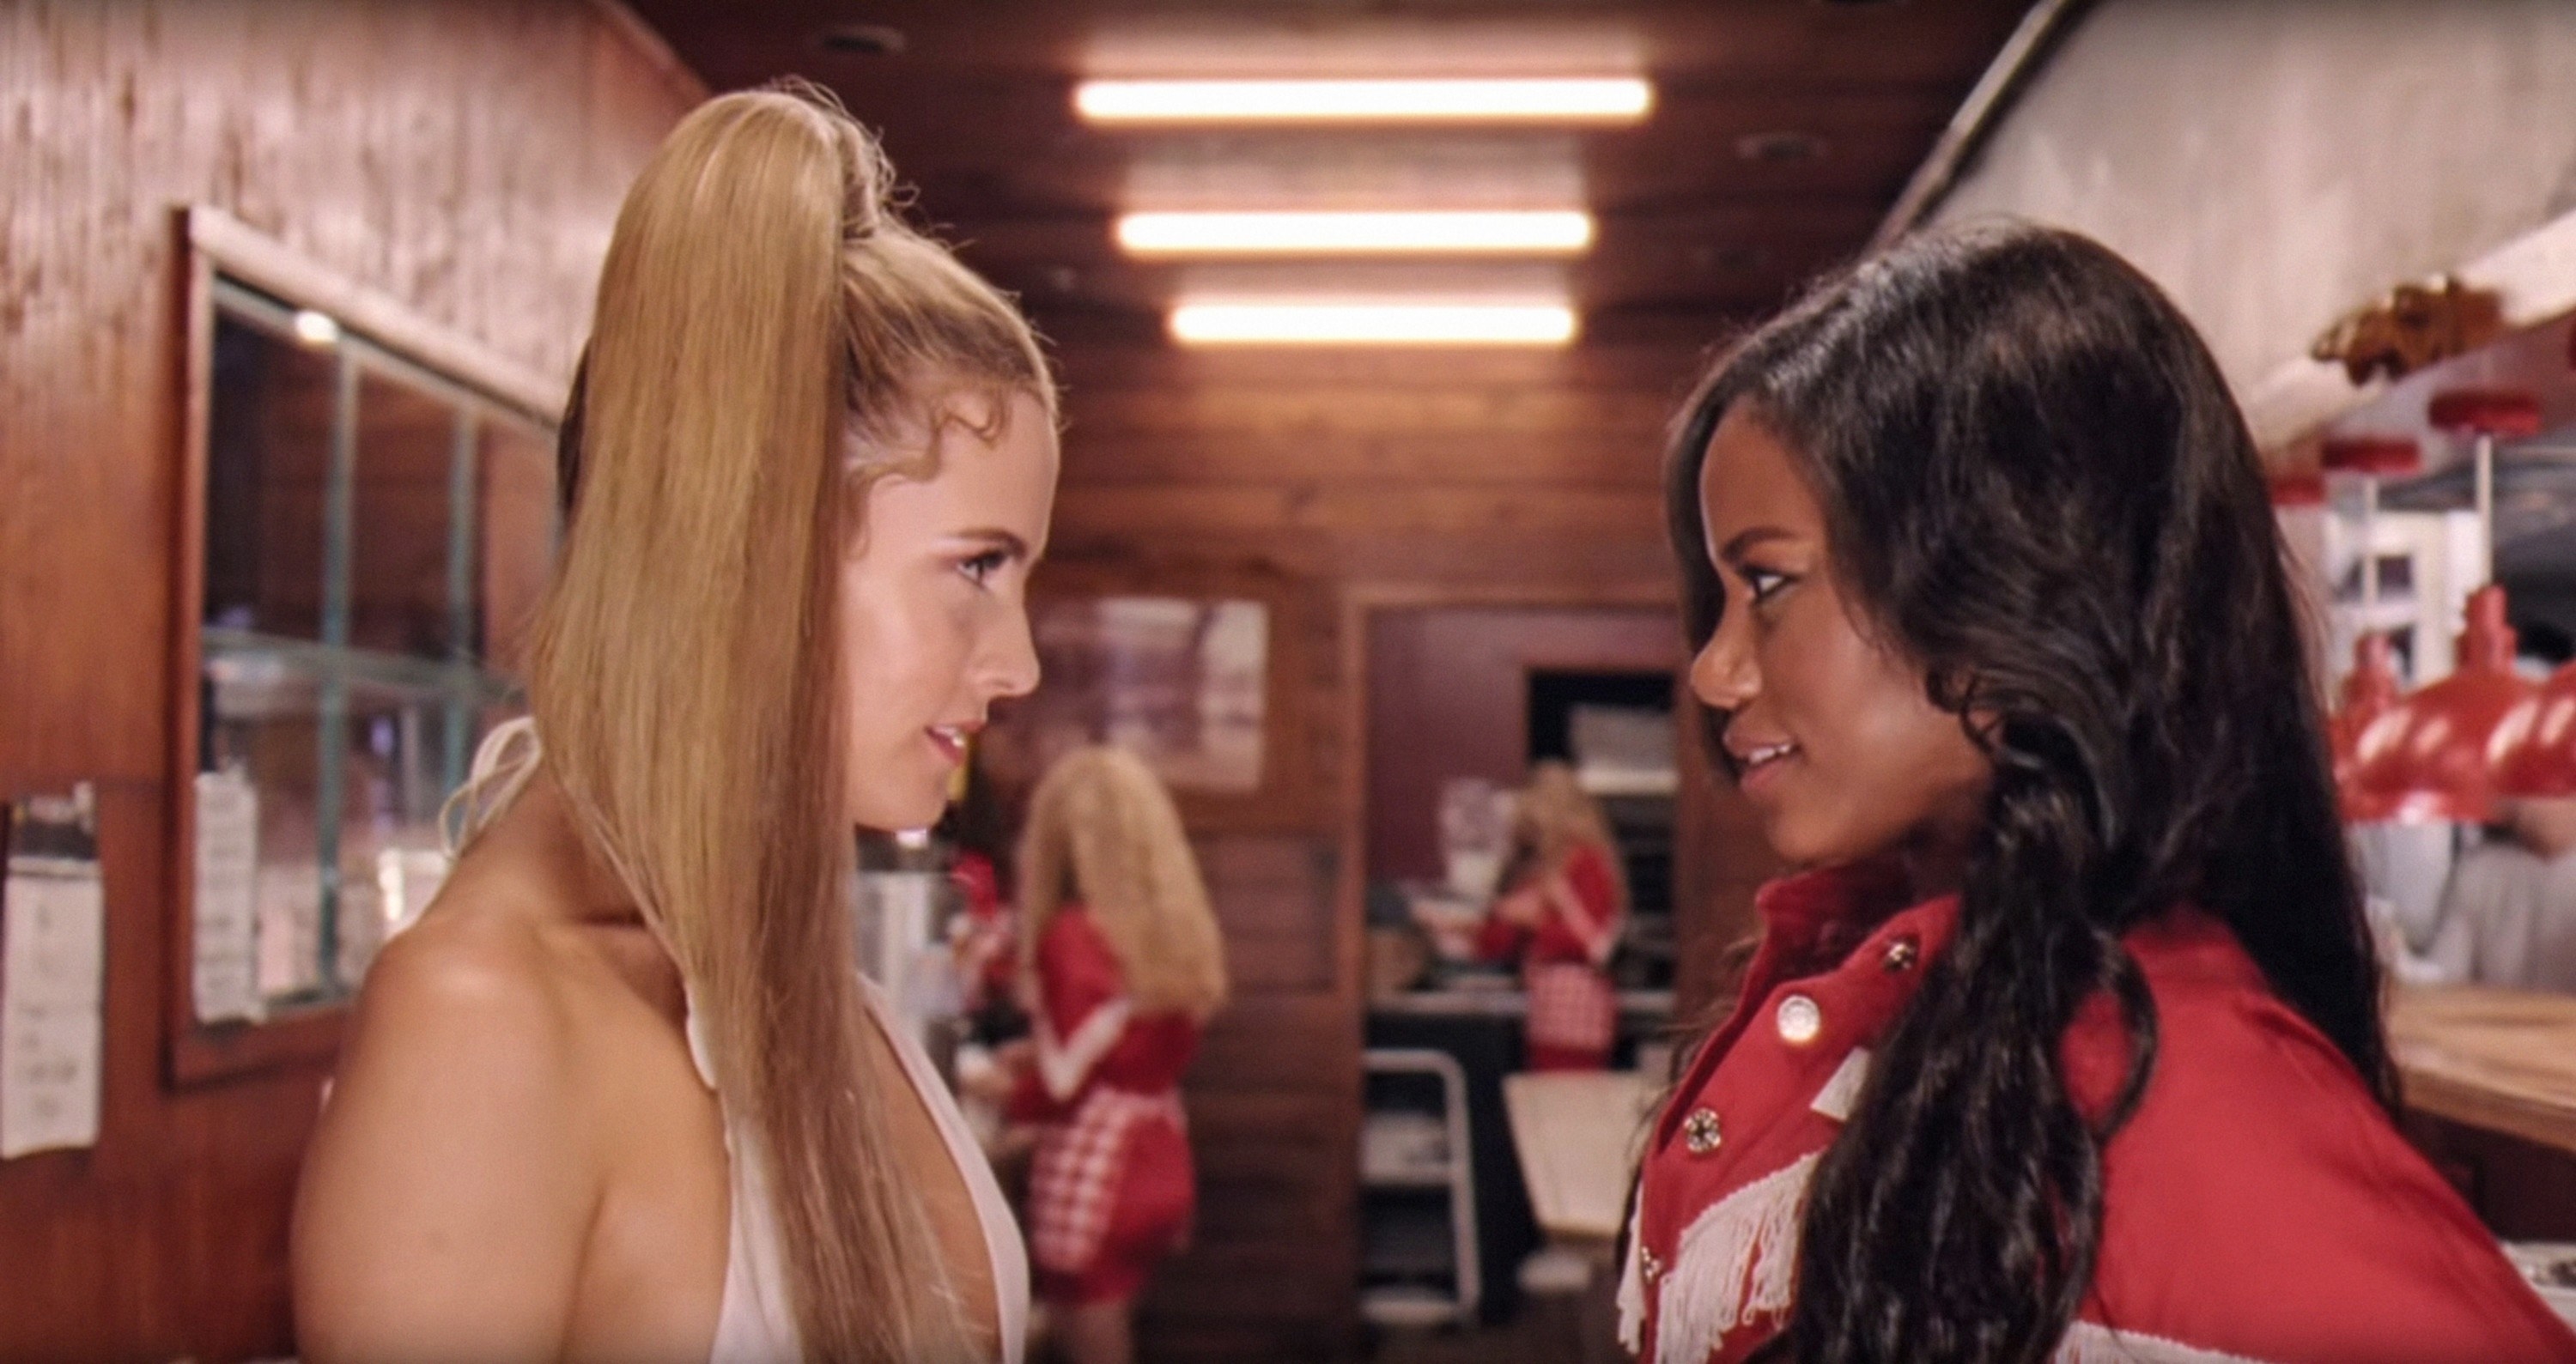 Riley Keough and Taylour Paige look at each other